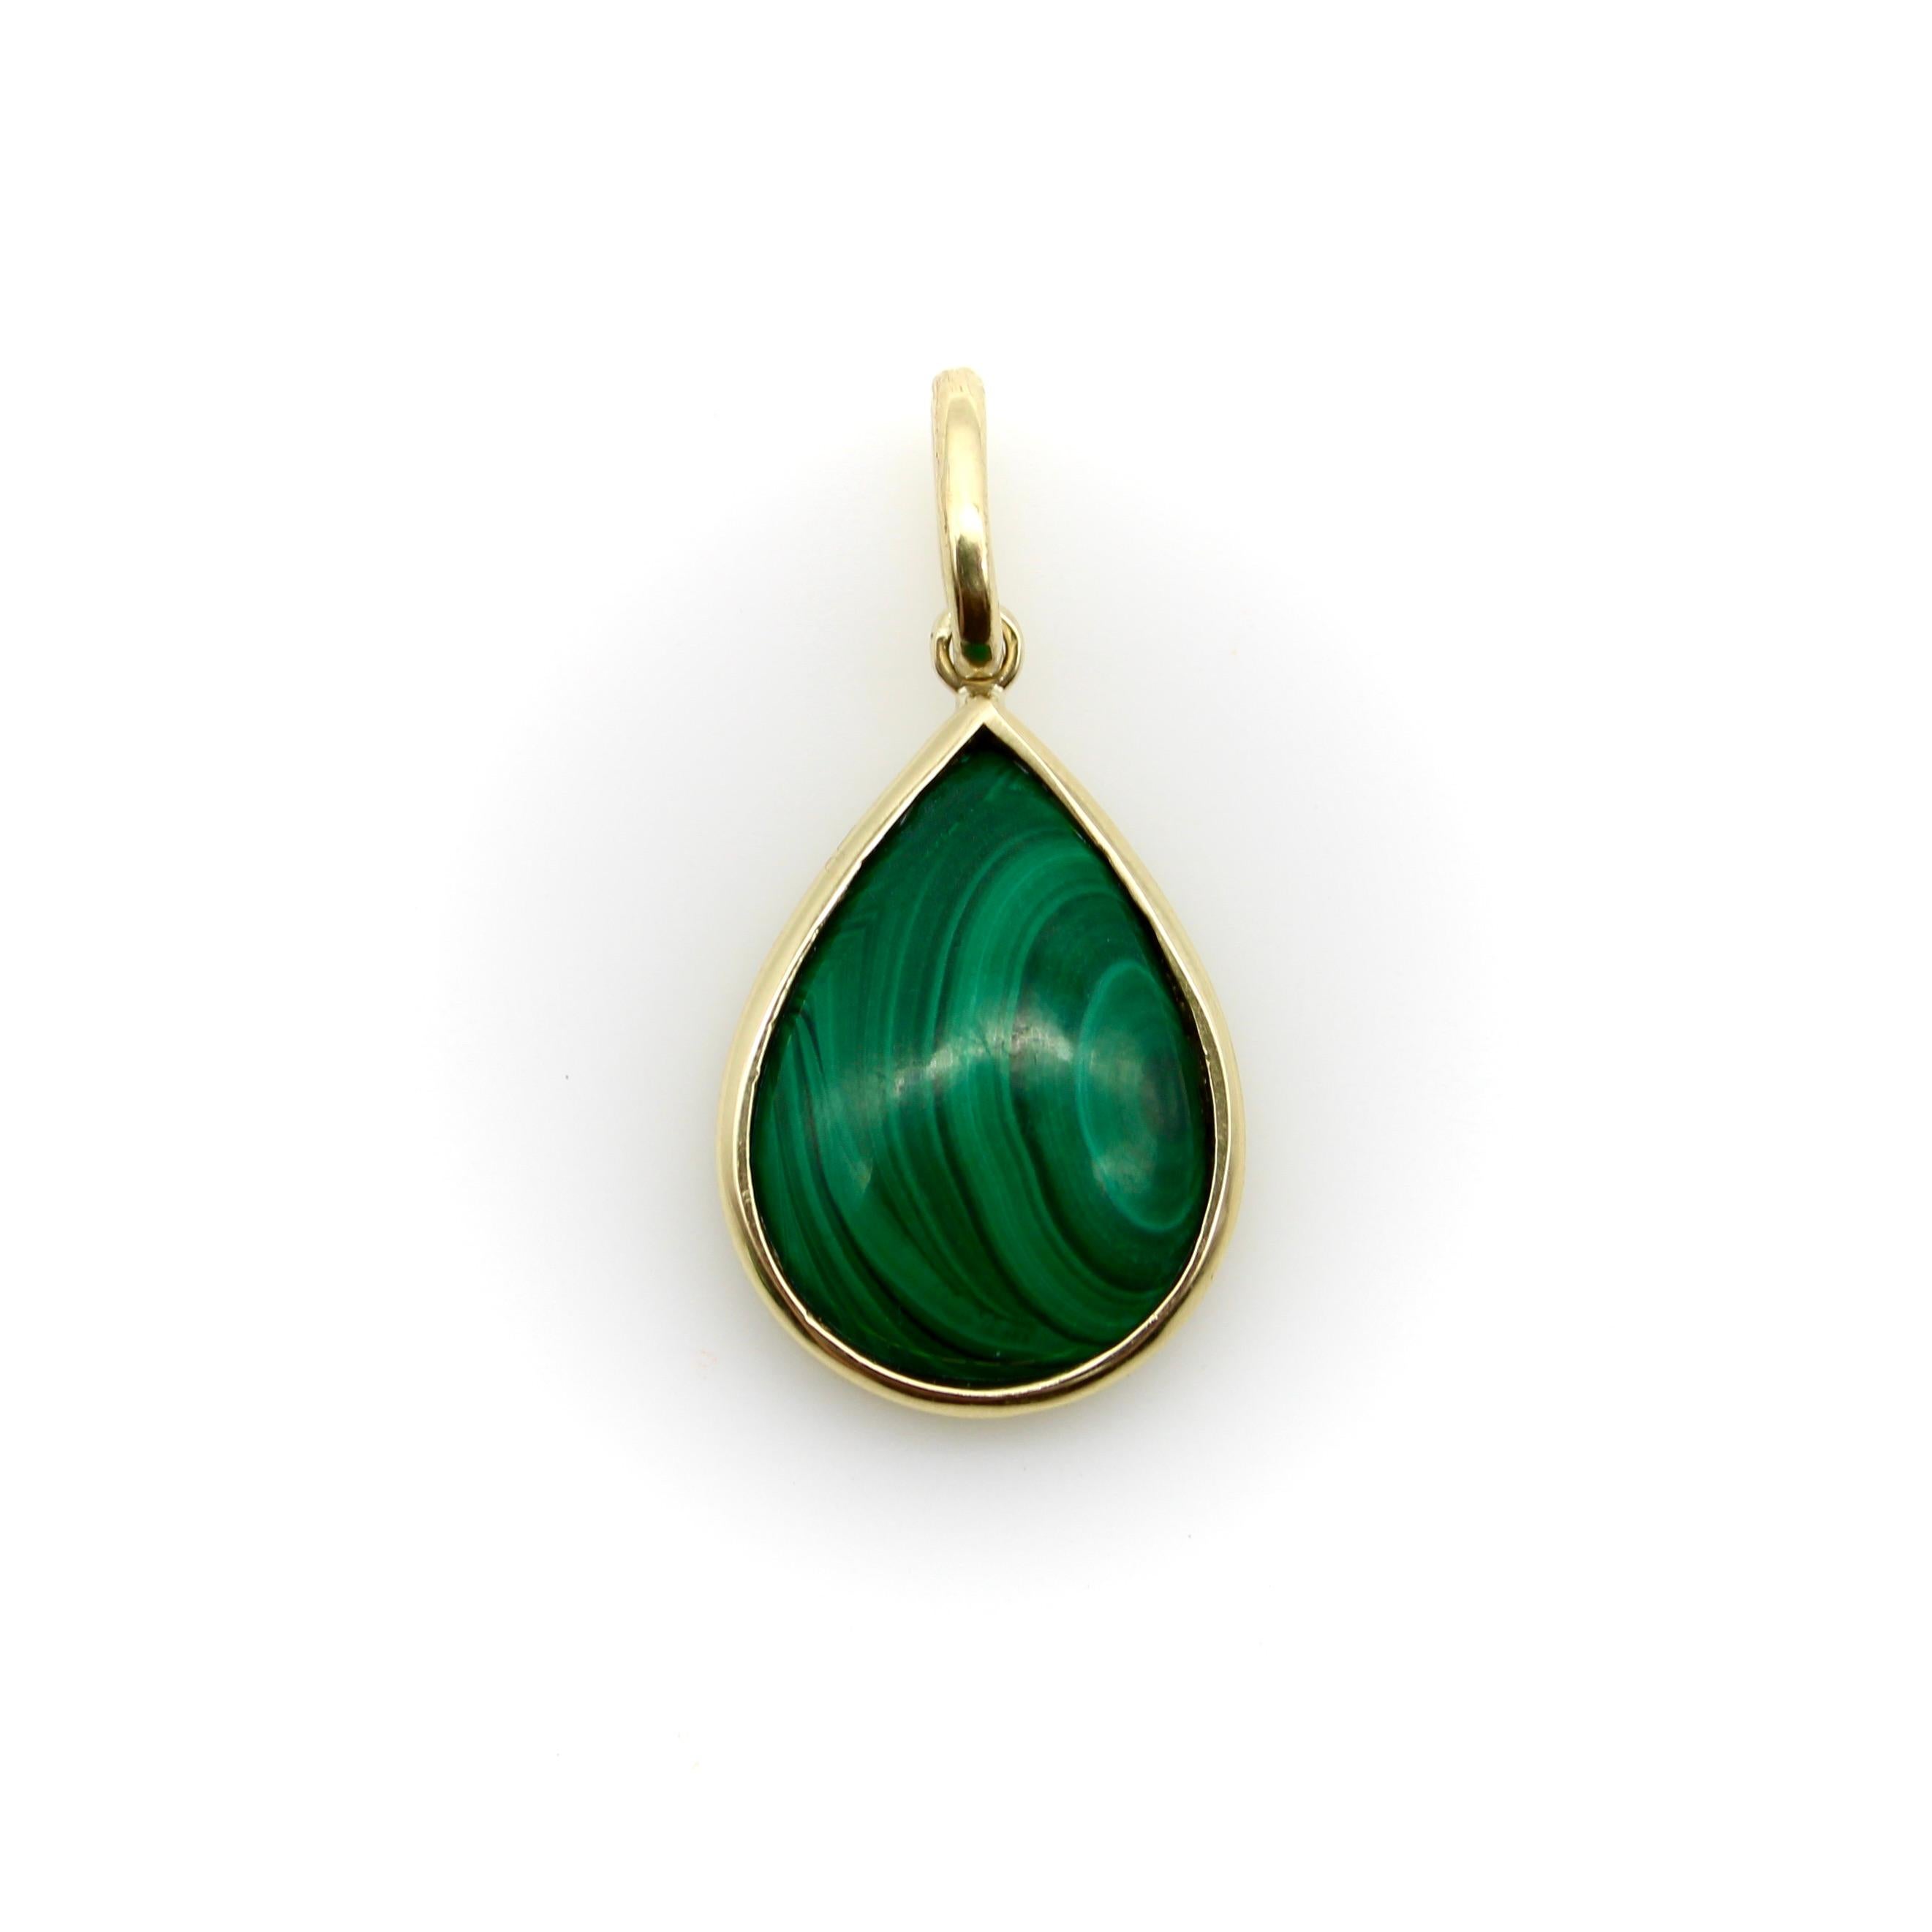 A sweet signature piece by Kirsten’s Corner, this pear-shaped malachite cabochon has been carefully bezel set in 14k gold. The malachite has beautiful patterning—hues of green spiral and come together in a bull’s eye near the edge of the stone. The